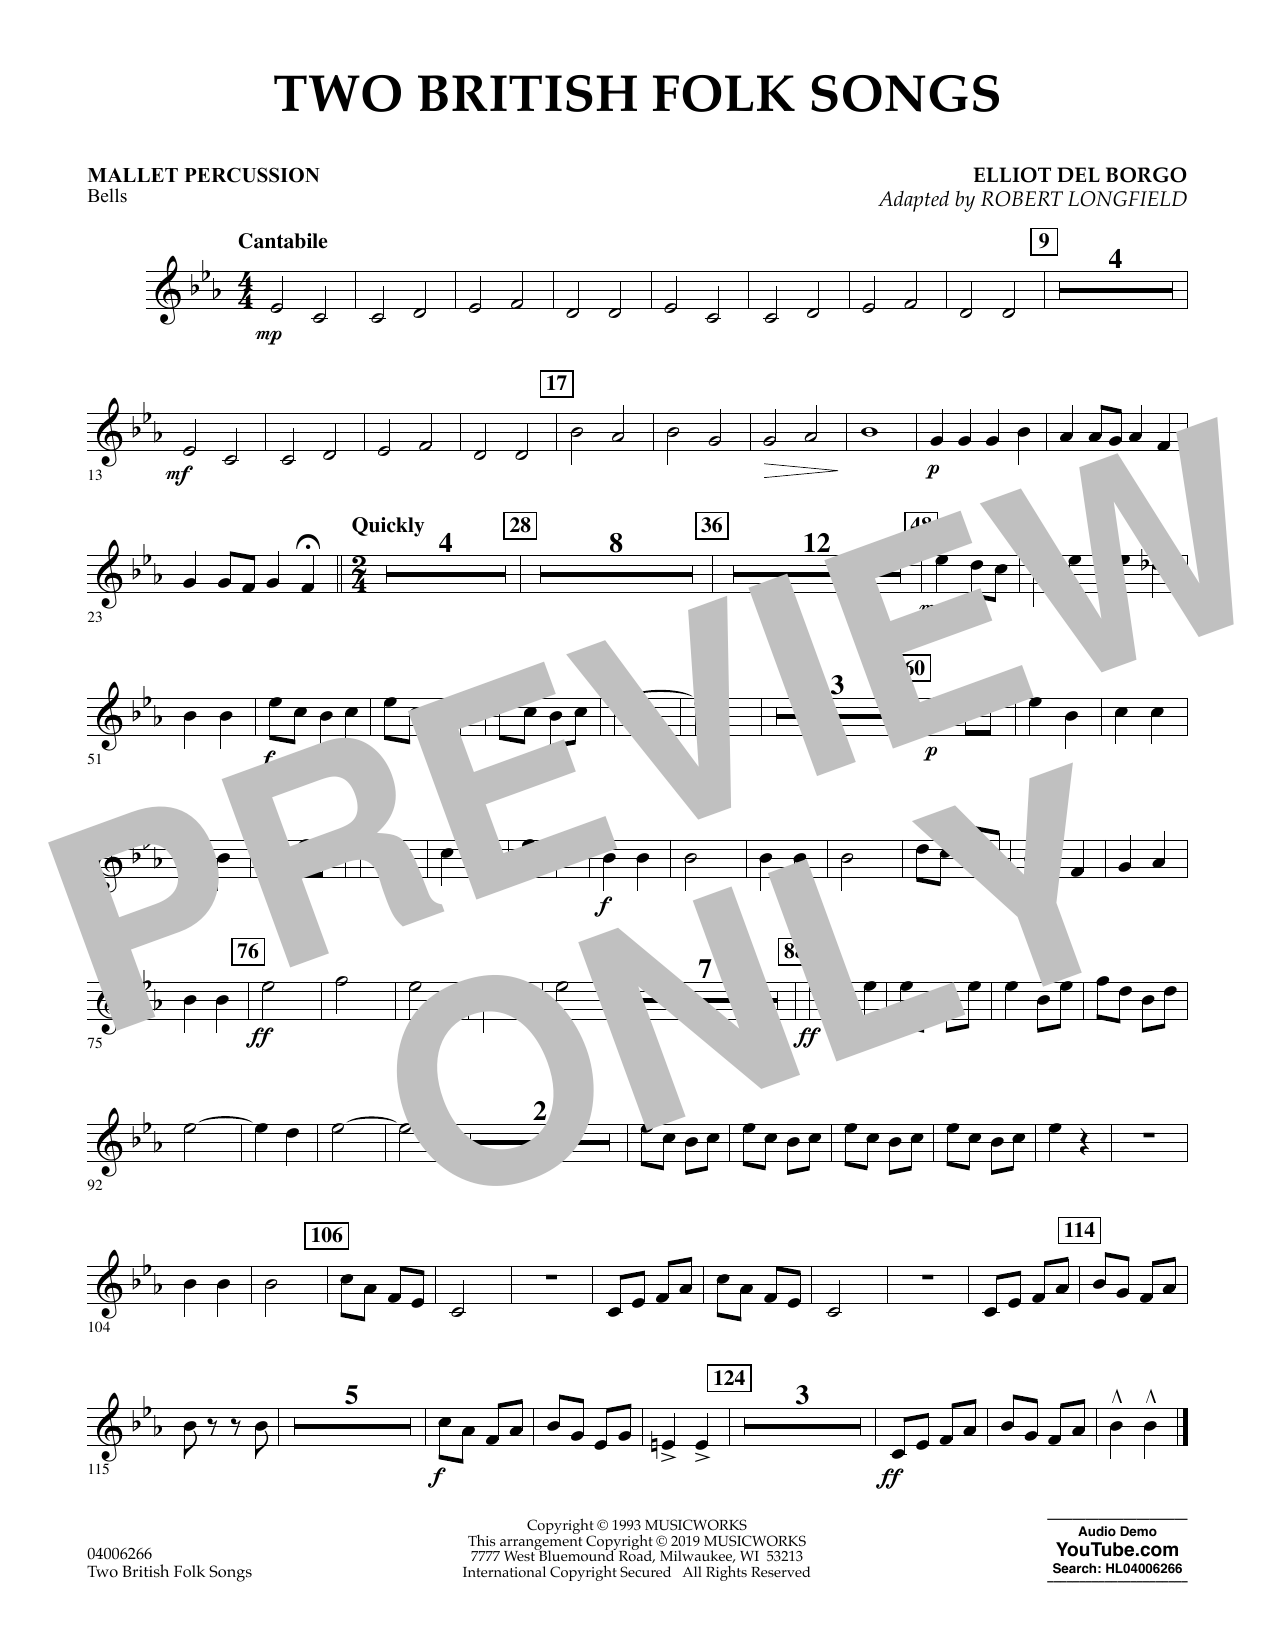 Elliot Del Borgo Two British Folk Songs (arr. Robert Longfield) - Mallet Percussion sheet music preview music notes and score for Concert Band including 1 page(s)